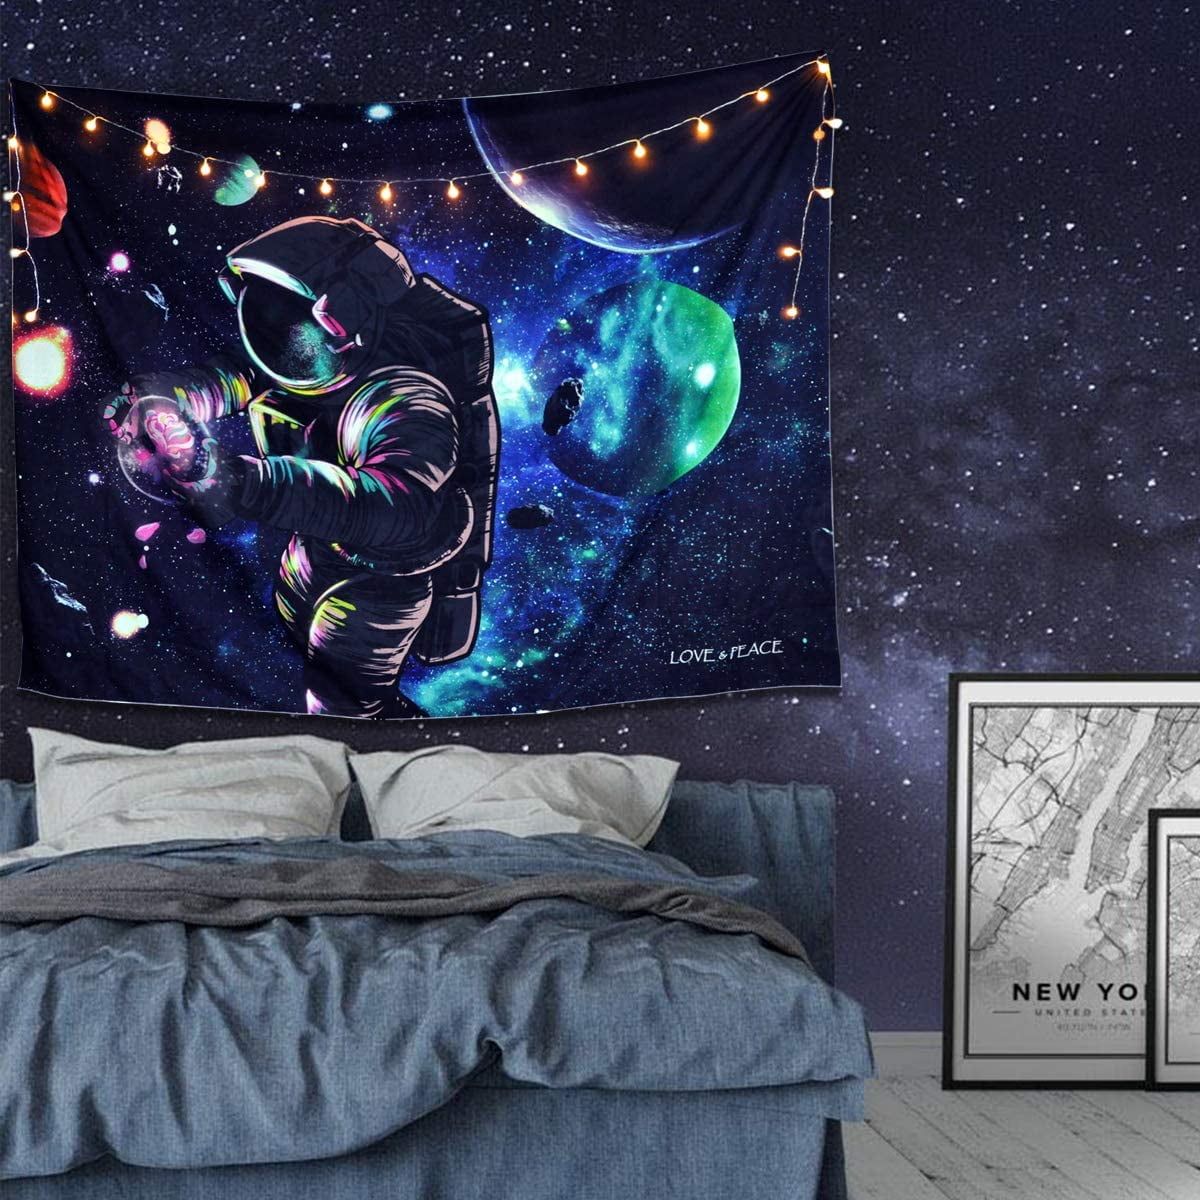 Leowefowas Outer Space Tapestry Spaceman Traveling In Universe With Skateboard Wall Hanging Kids Boy Room Decor Astronaut Wall Blanket Living Room Bedroom Home Decoration Wall Art 33.9x27.6 